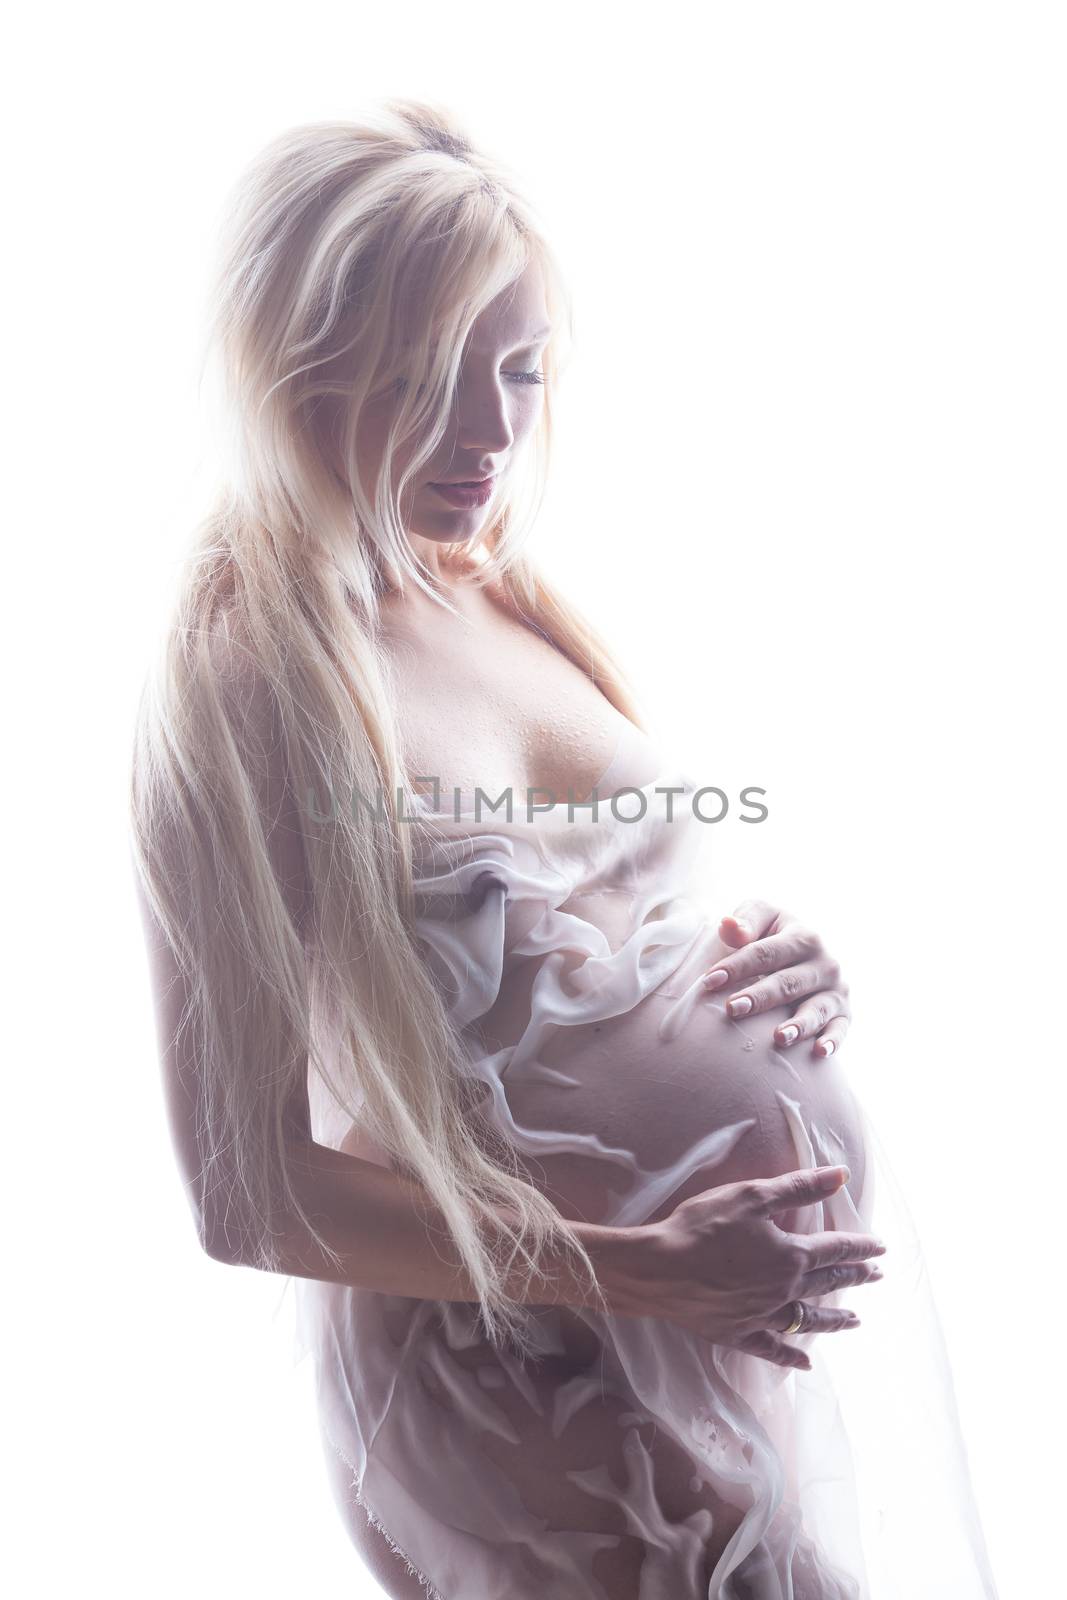 Young Pregnant Woman In High Key by Fotoskat